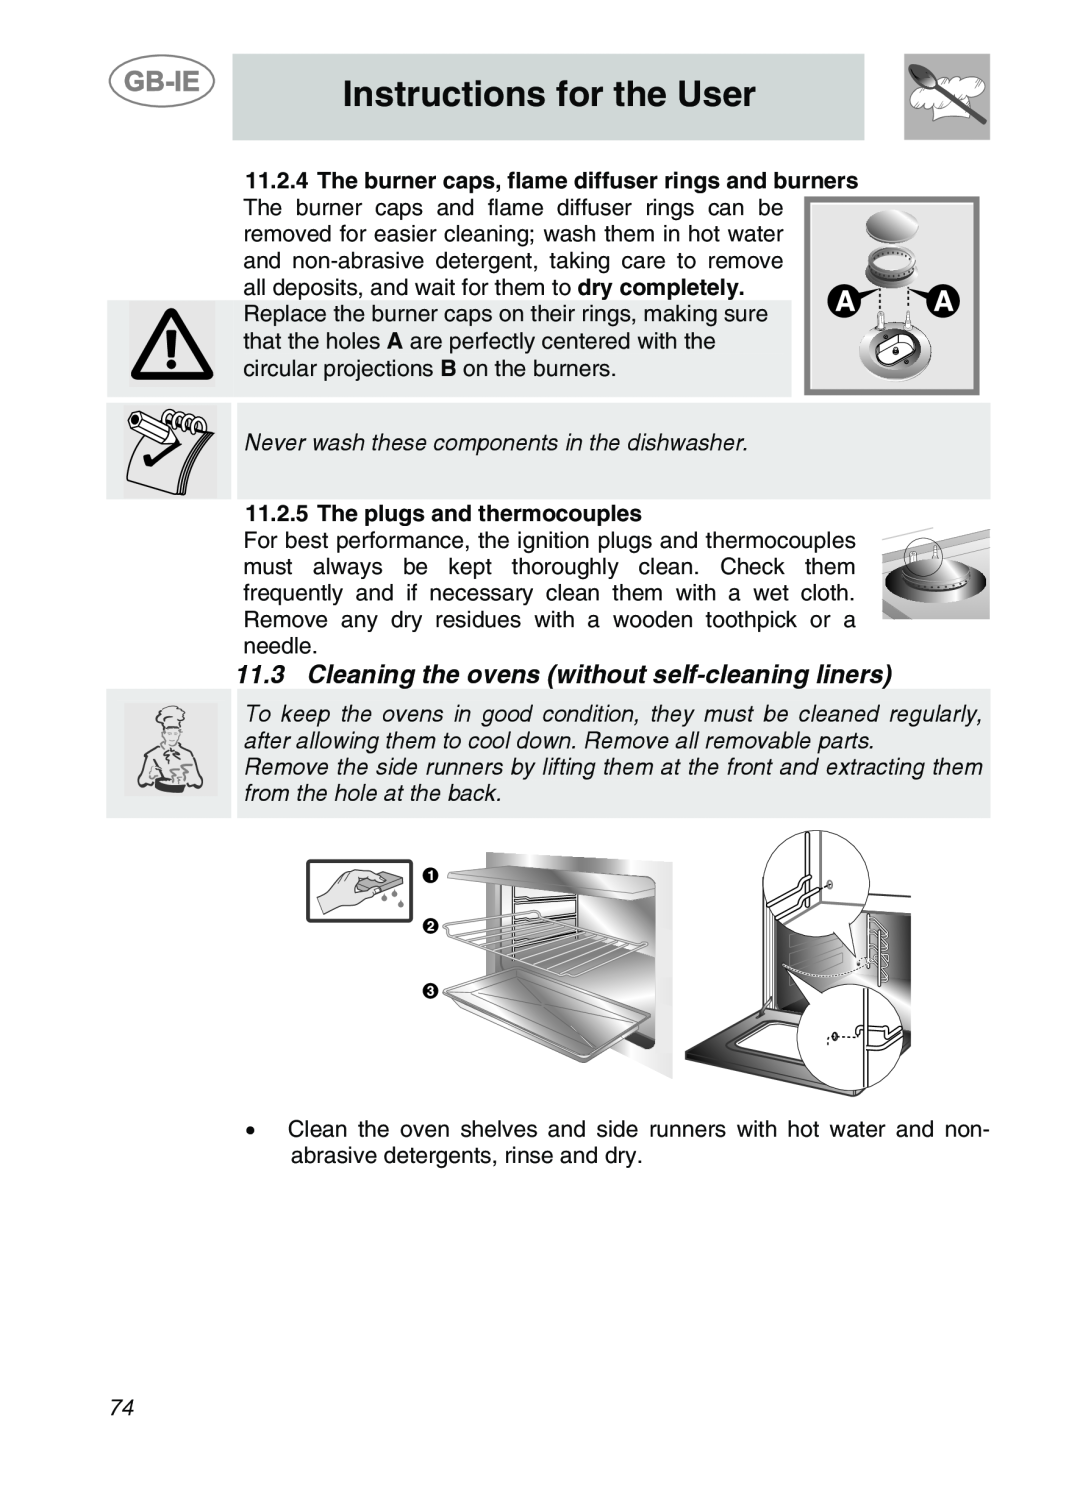 Smeg CS122-6 manual Cleaning the ovens without self-cleaning liners, The plugs and thermocouples, Instructions for the User 